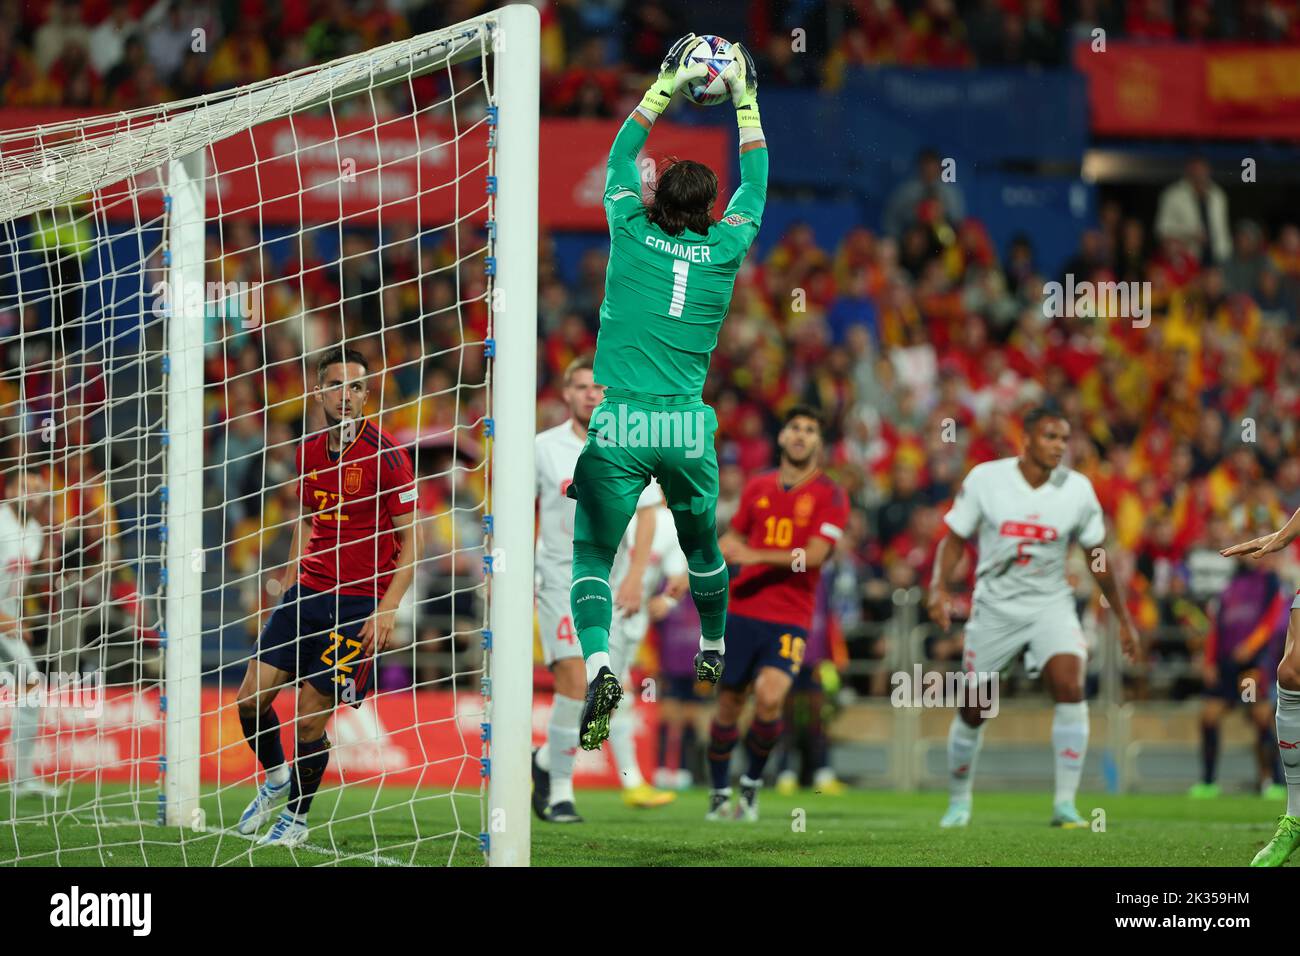 Yann Sommer of Switzerland in action during the UEFA Nations League League A Group 2 match between Spain and Switzerland at La Romareda on September 24, 2022 in Zaragoza, Spain Stock Photo